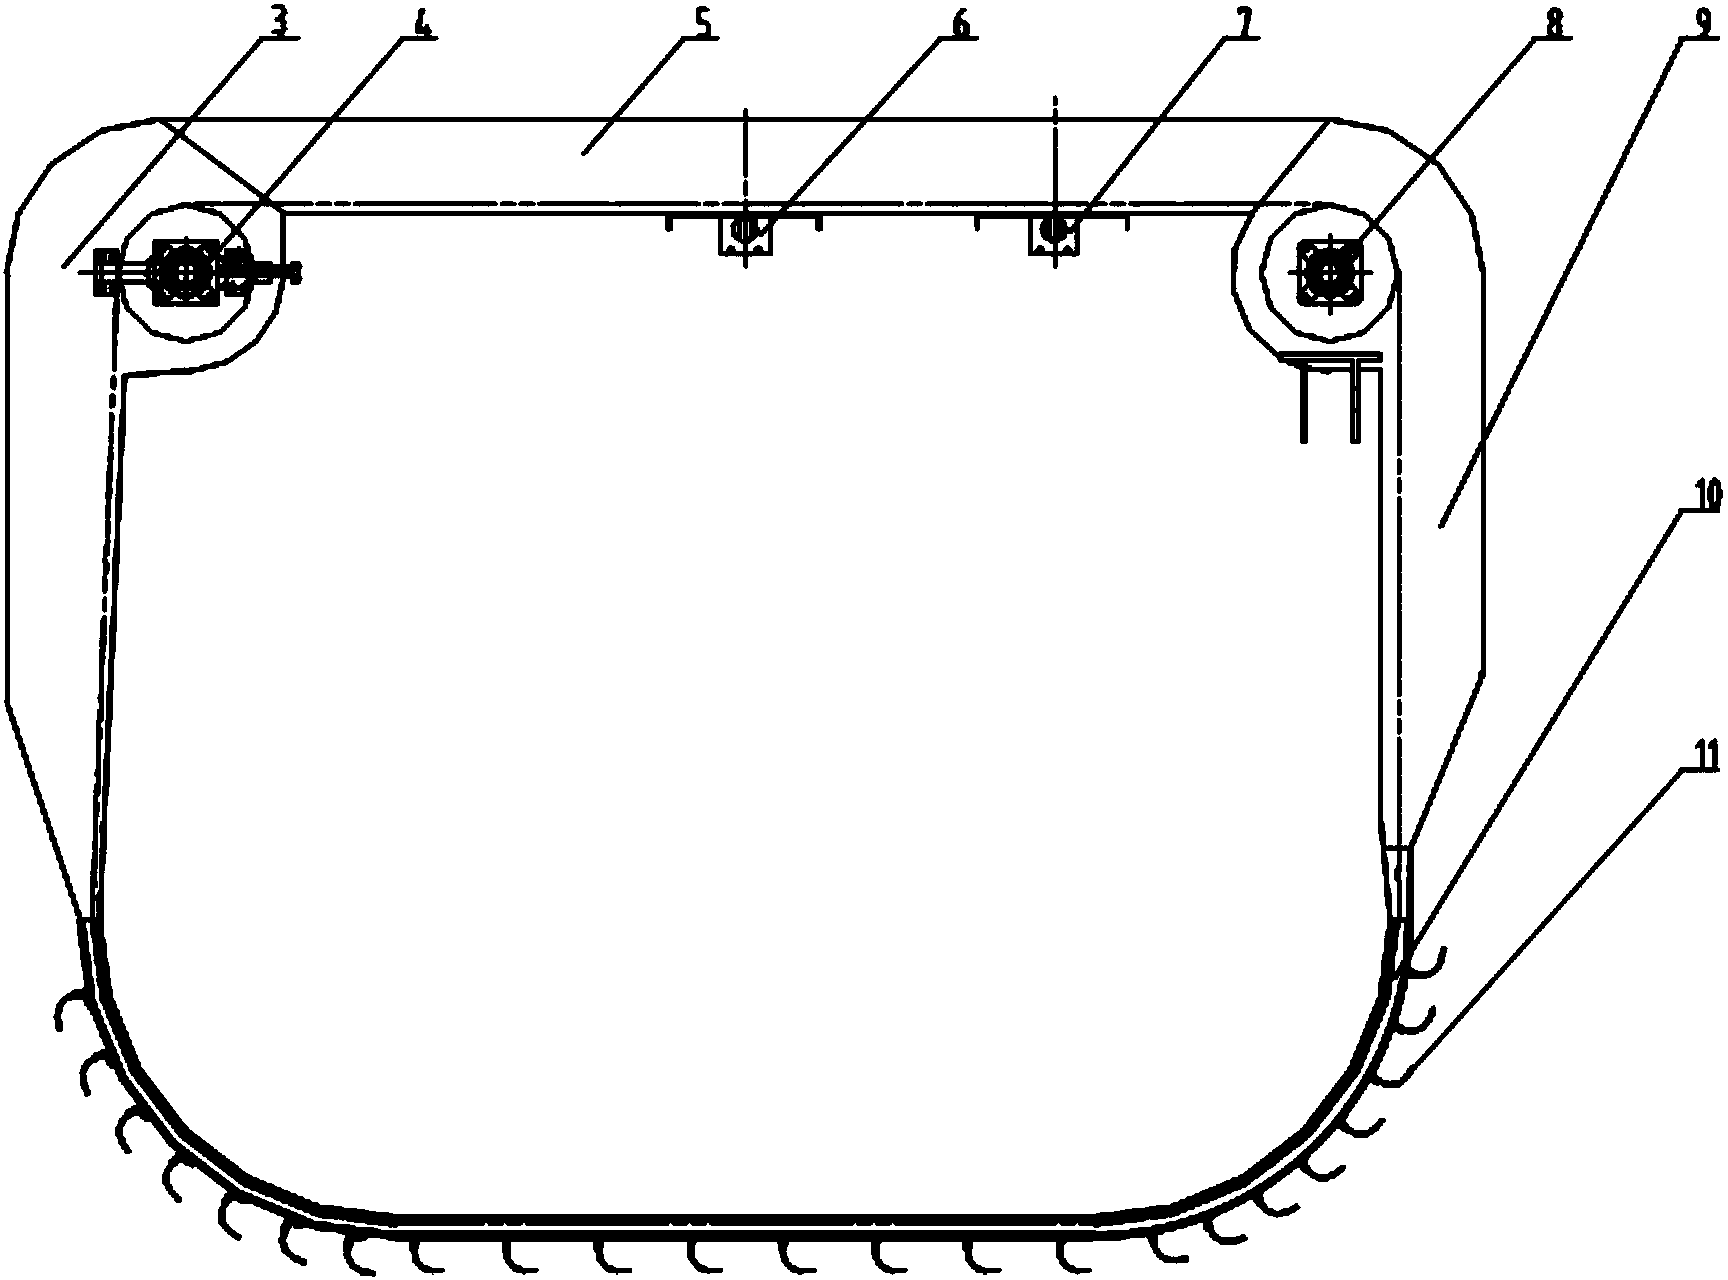 Annular conveyor and mobile vehicle associated with same